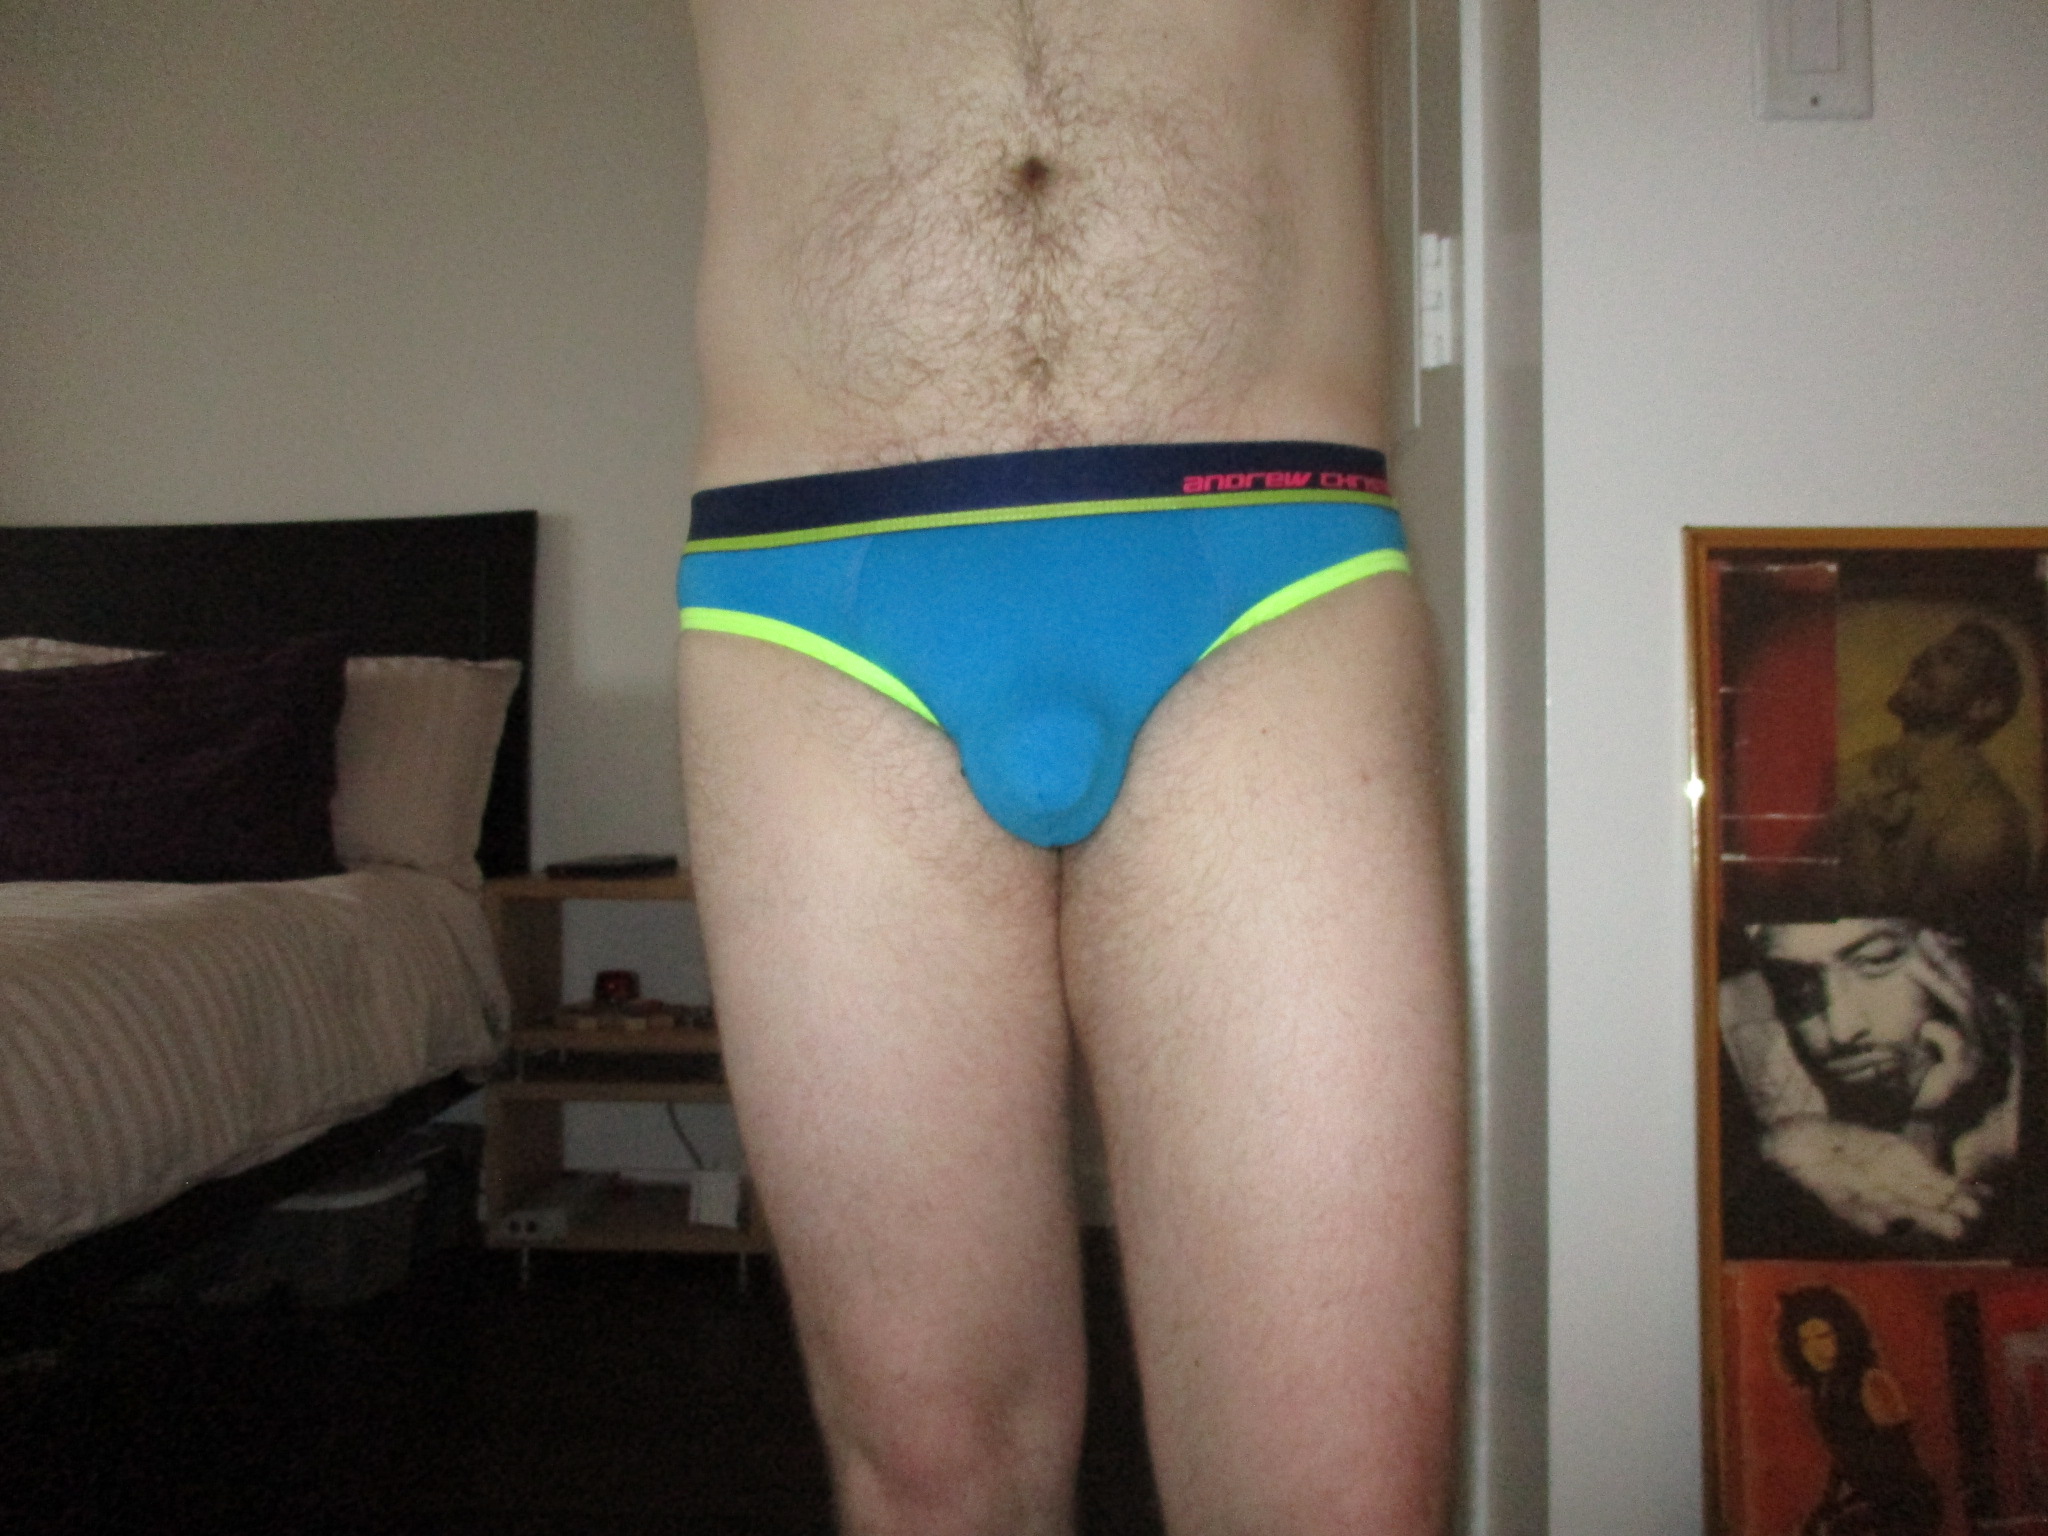 Humpday, Jockstrap Wednesday, Health Humpday…they all cum but once a week…